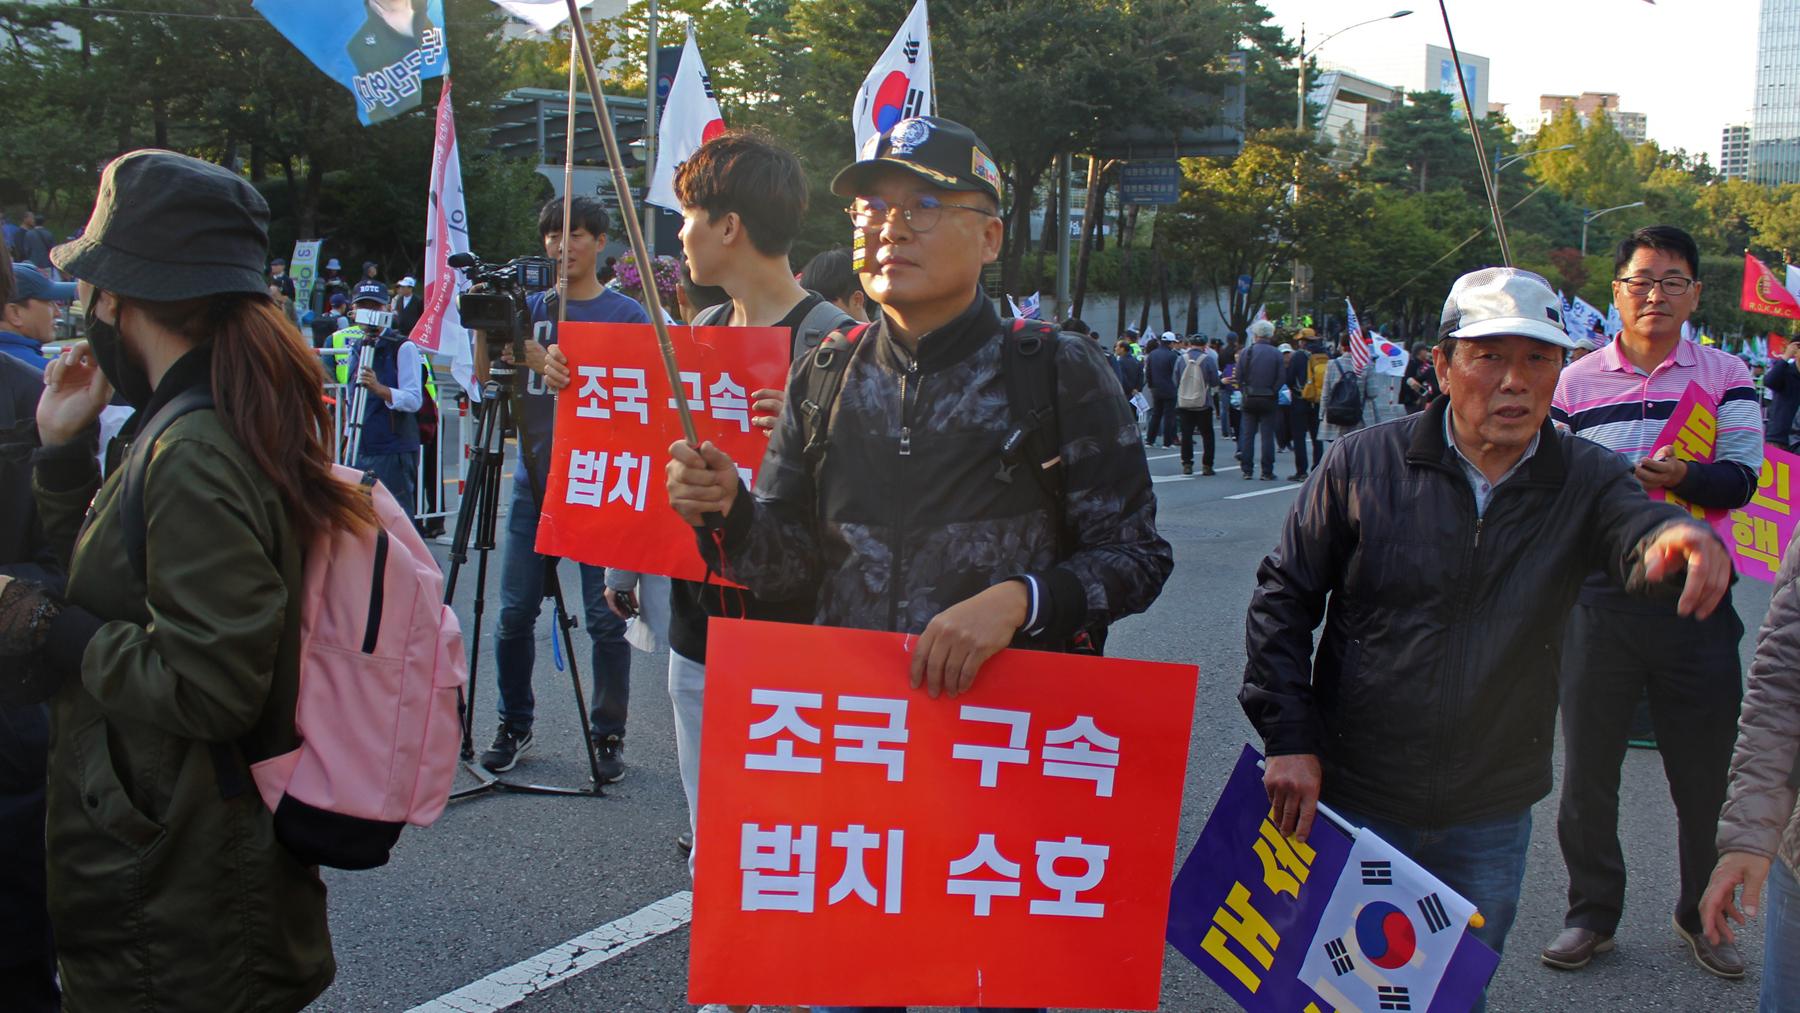 Man stands at protest with red sign and white letters in Korean 